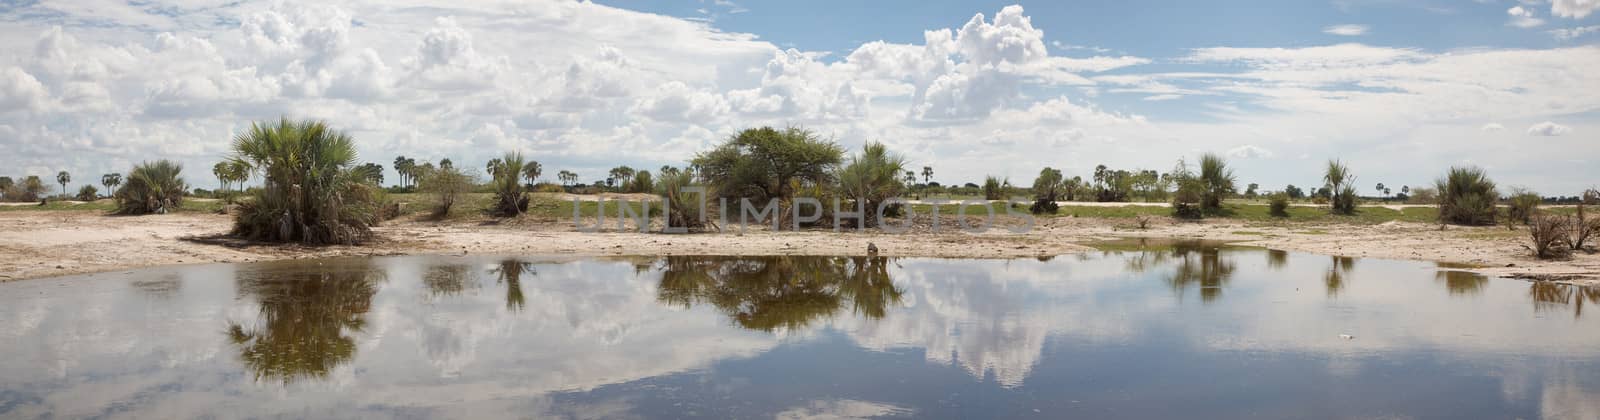 African landscape with trees reflected in water by watchtheworld